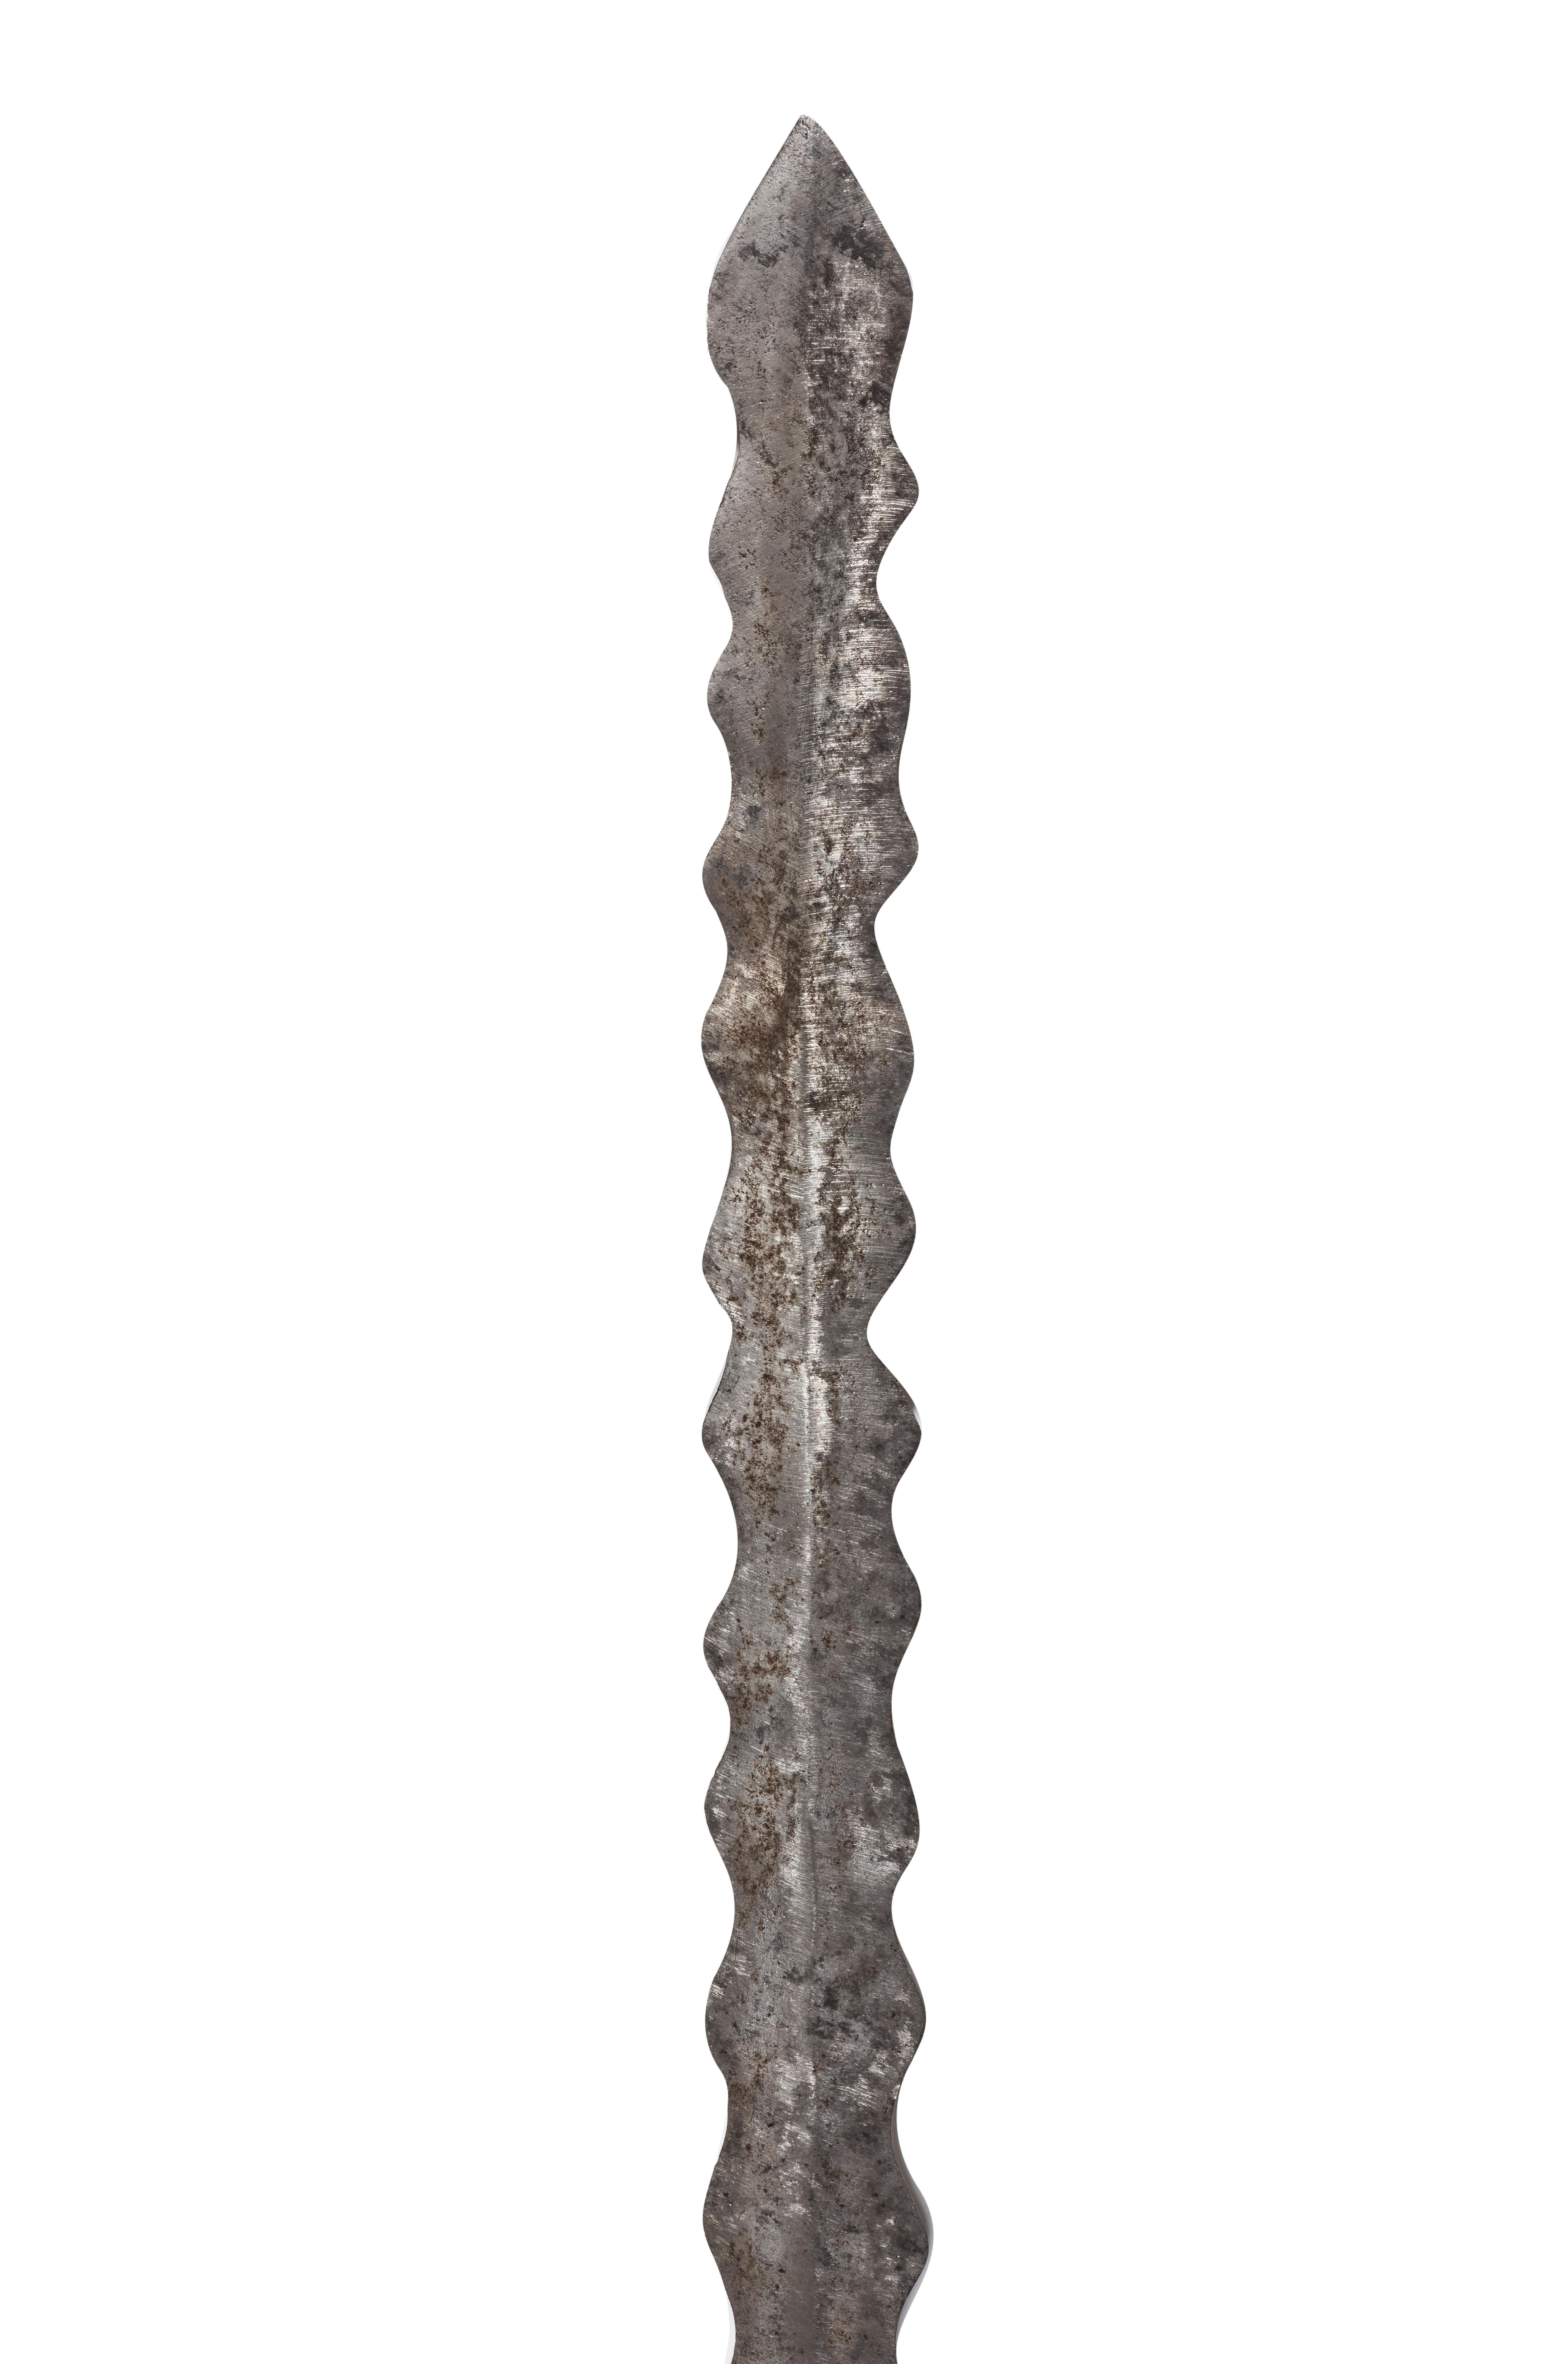 16th century period.
Long blade with two thorns in half-moon then flaming.
The large guard is with two branches and quillons bent towards the point and provided with large wrought iron rings encircling two fleur-de-lis (Munich), and profusely